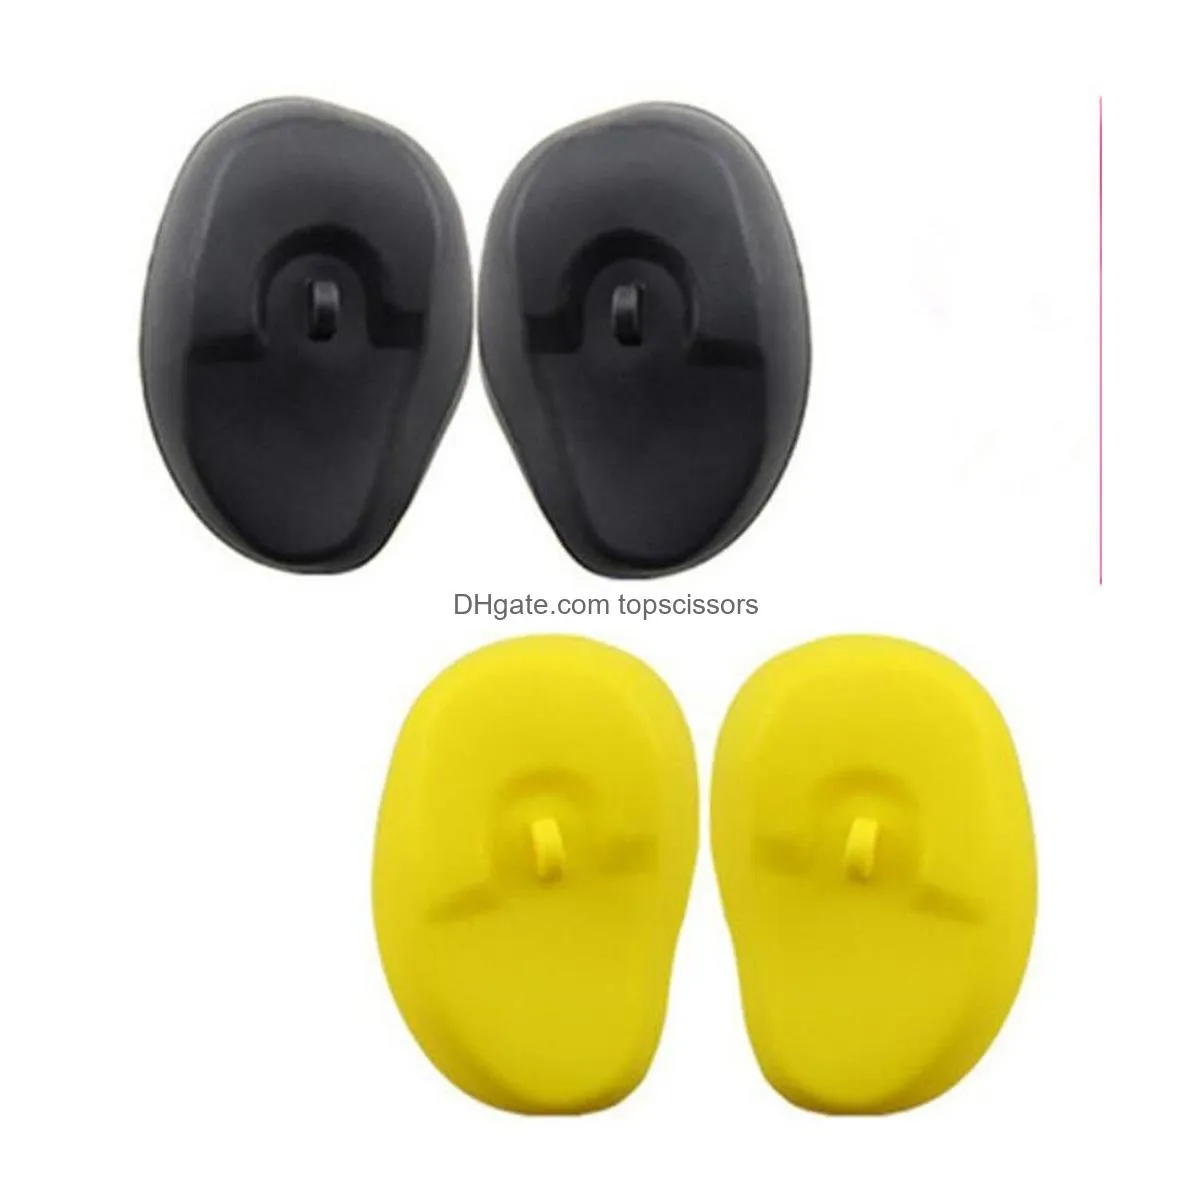 silicone ear cover practical travel hair color showers water shampoo ear protector cover for ear care xb1